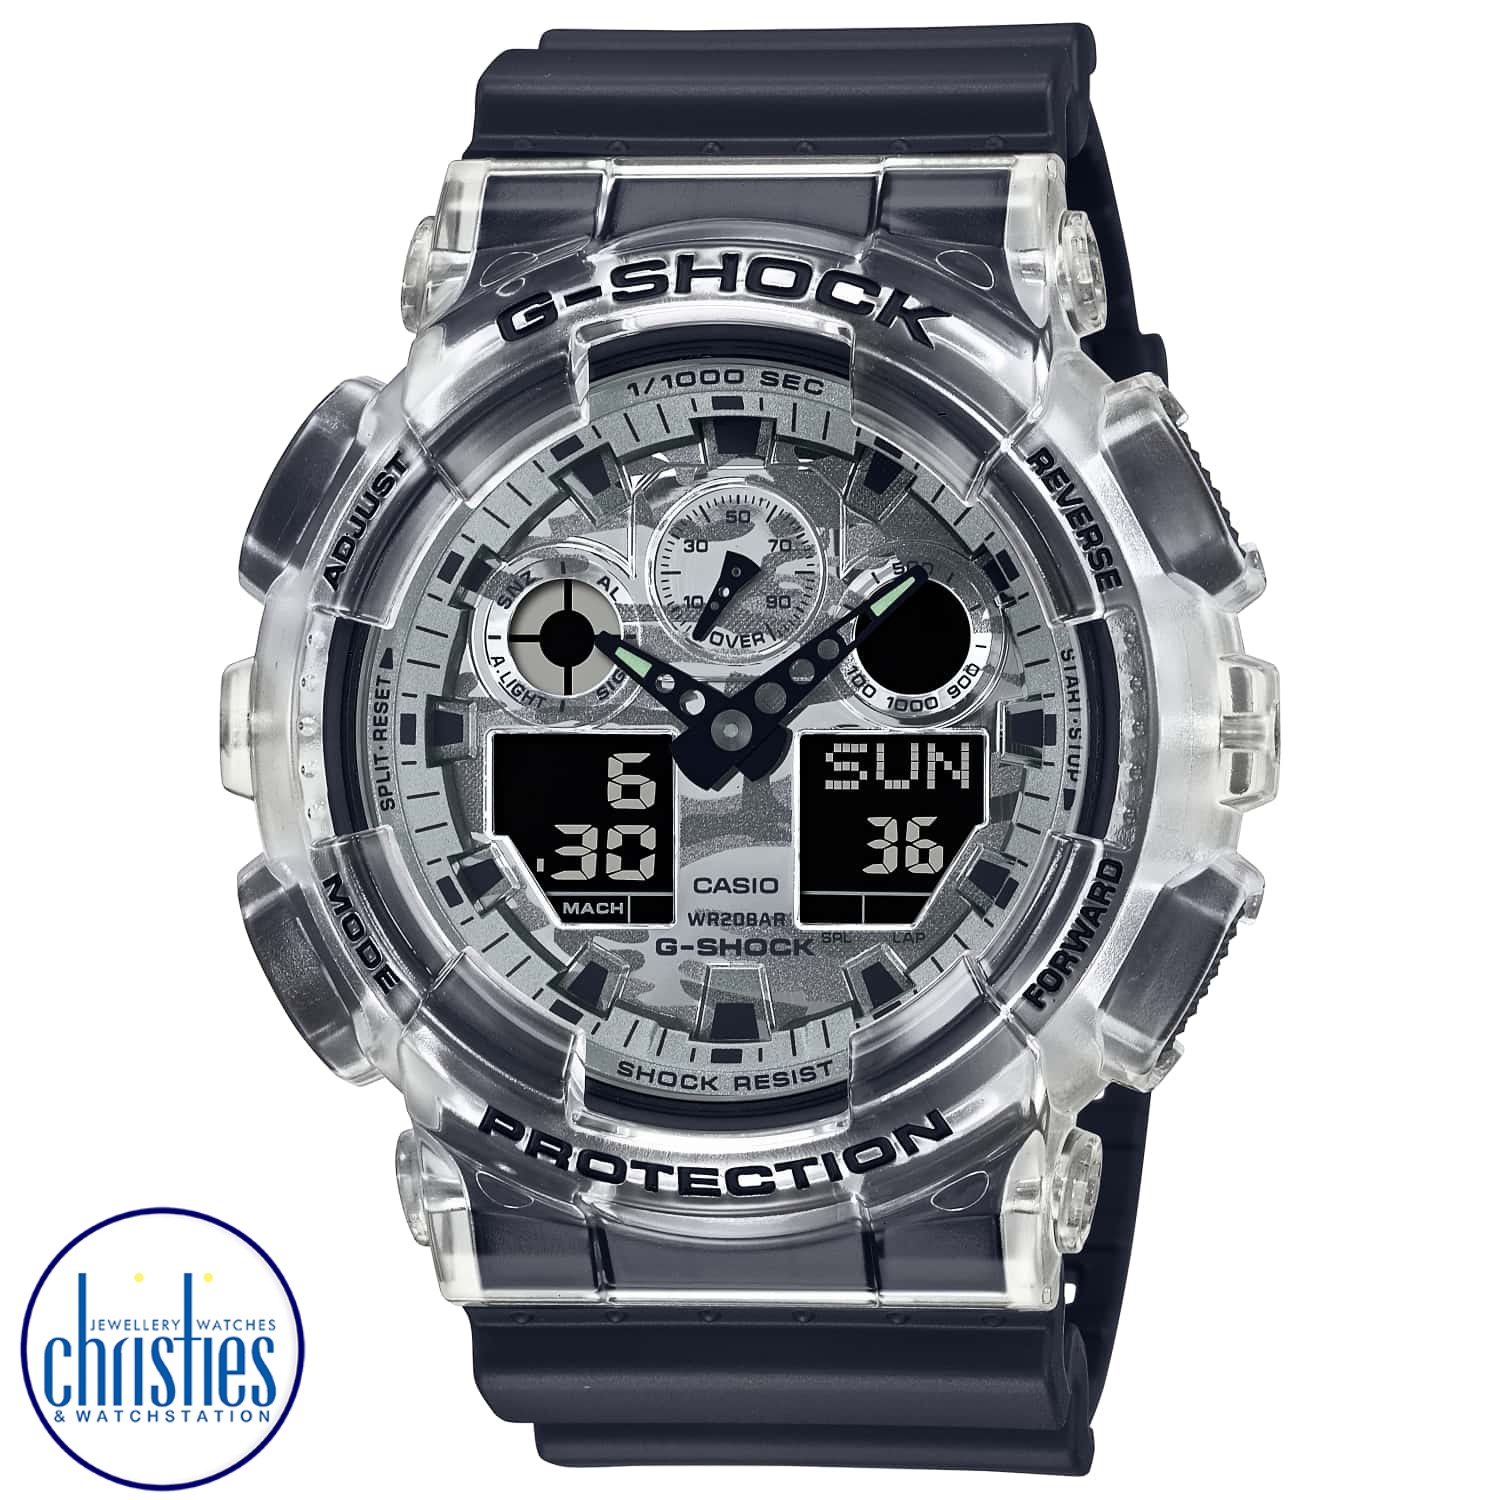 GA100SKC-1A G-Shock Camouflage Watch. Go stealthily in a G-SHOCK with a camouflage dial and translucent bezel.